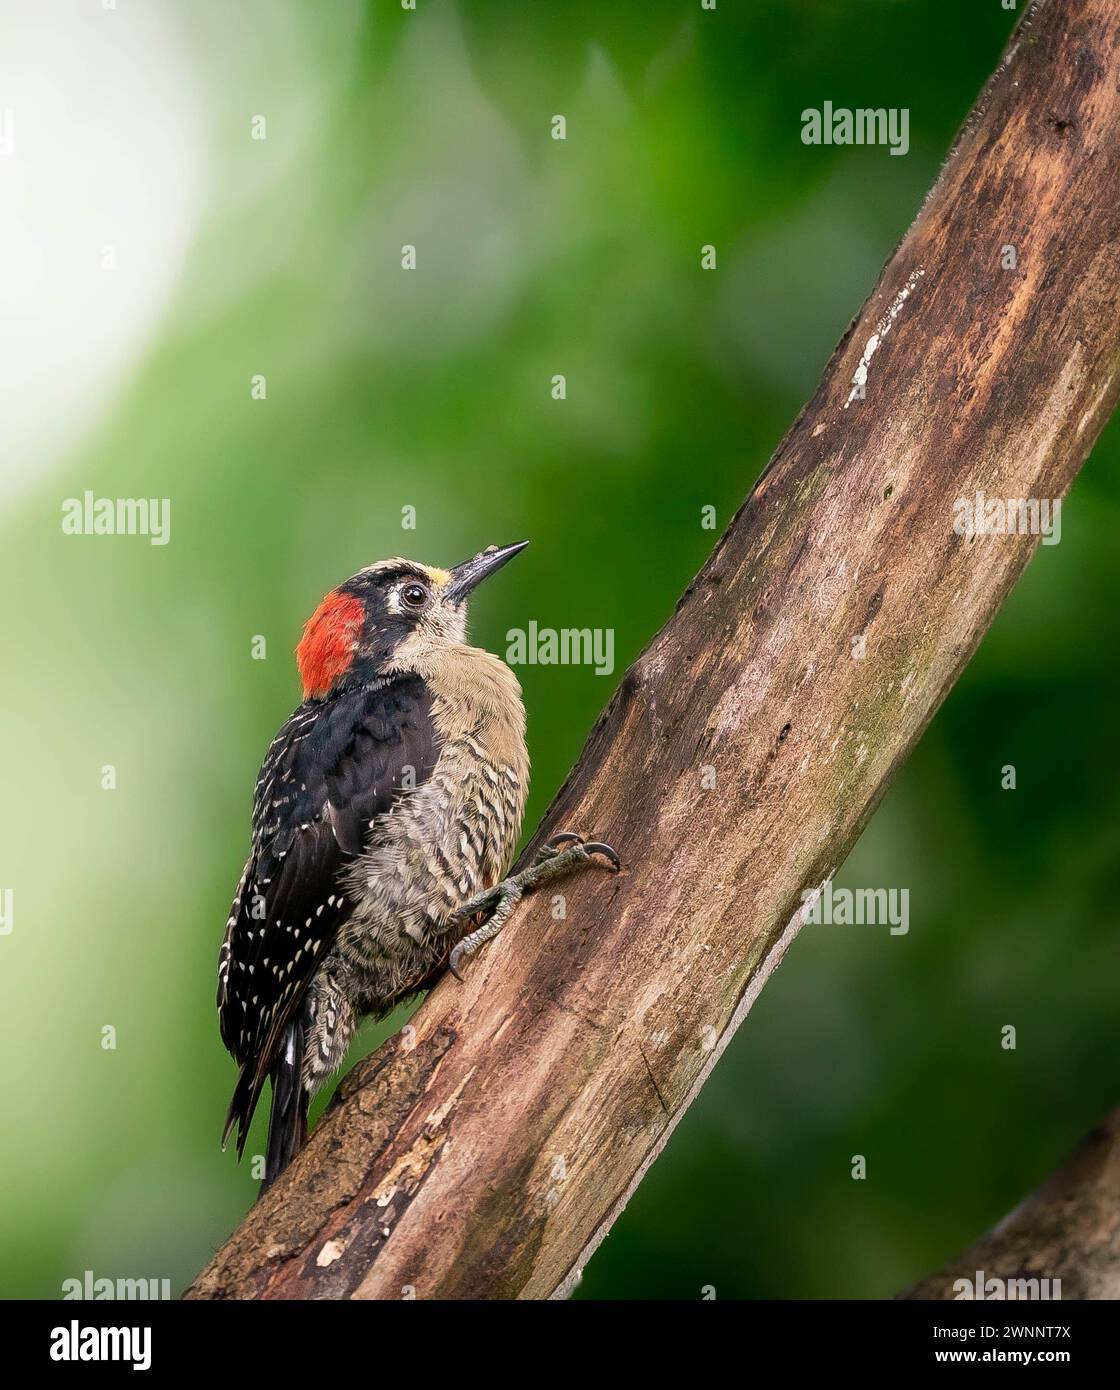 Black-cheeked Woodpecker (Melanerpes pucherani) perched on a branch in Costa Rica Stock Photo